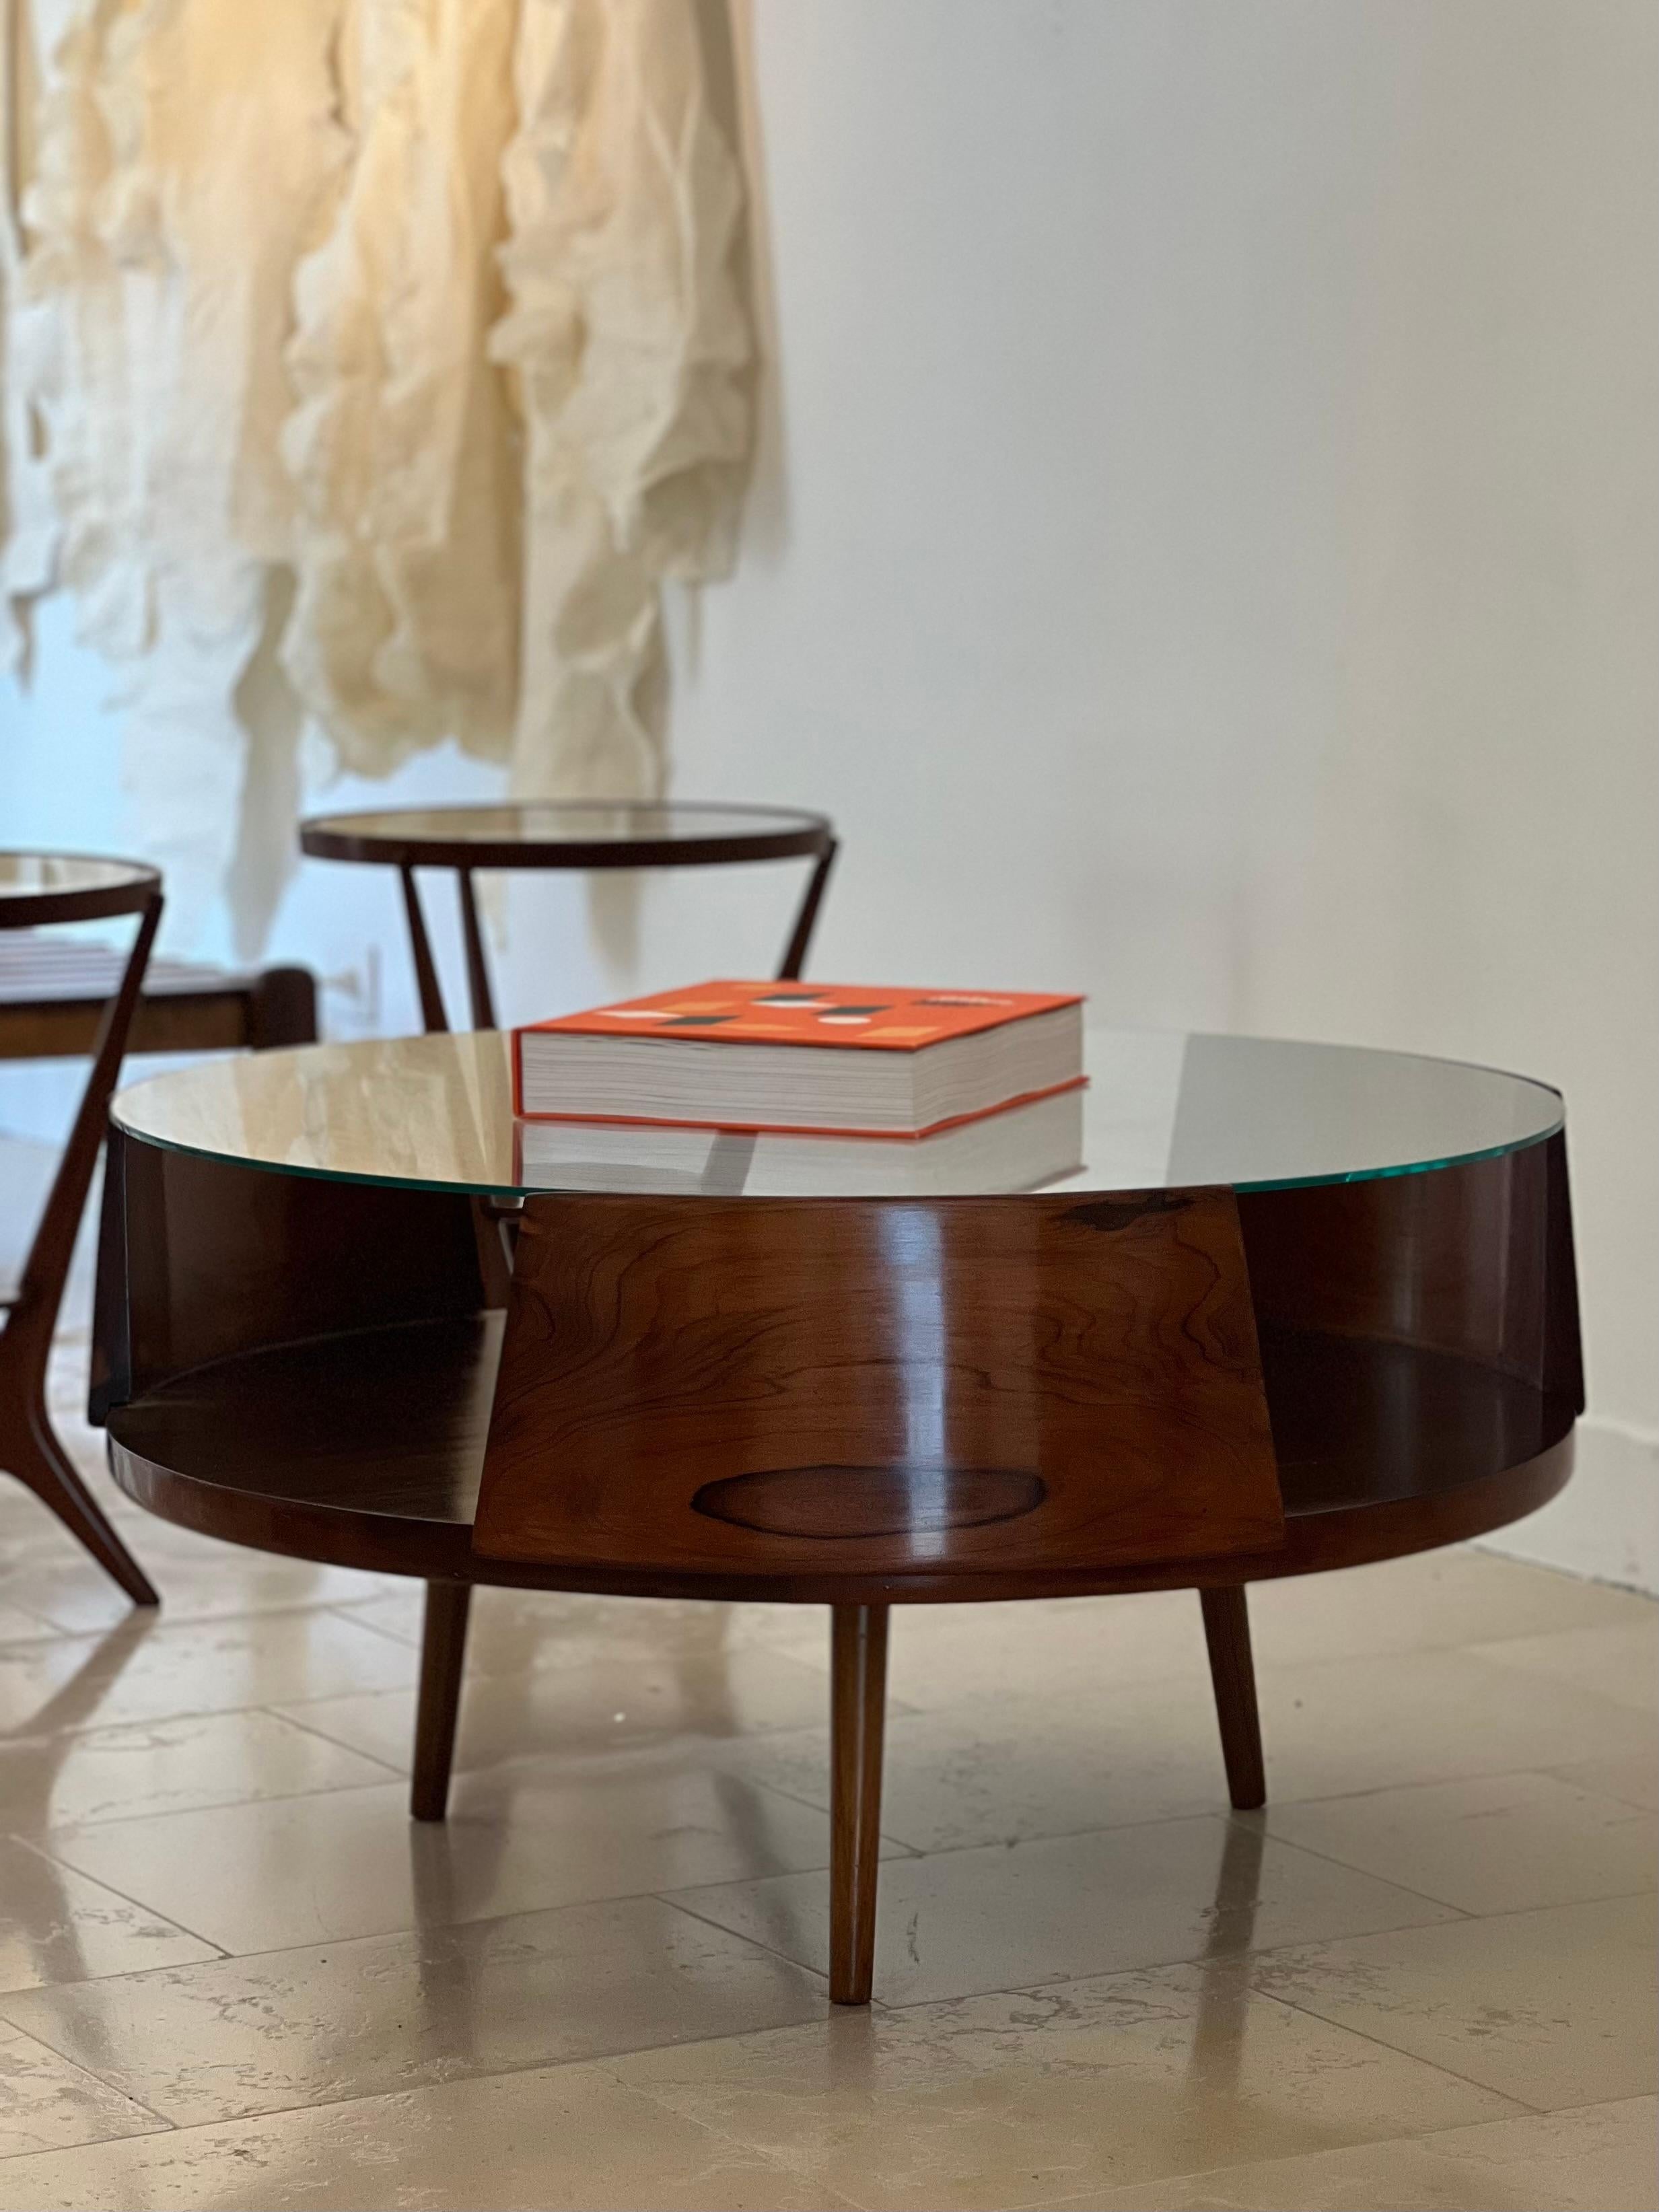 Mid-Century Modern Center Table by Carlo Hauner, Brazil 1960s

Mid-Century Modern Center Table designed by Carlo Hauner in 60s, has wooden structure and nesting glass top.